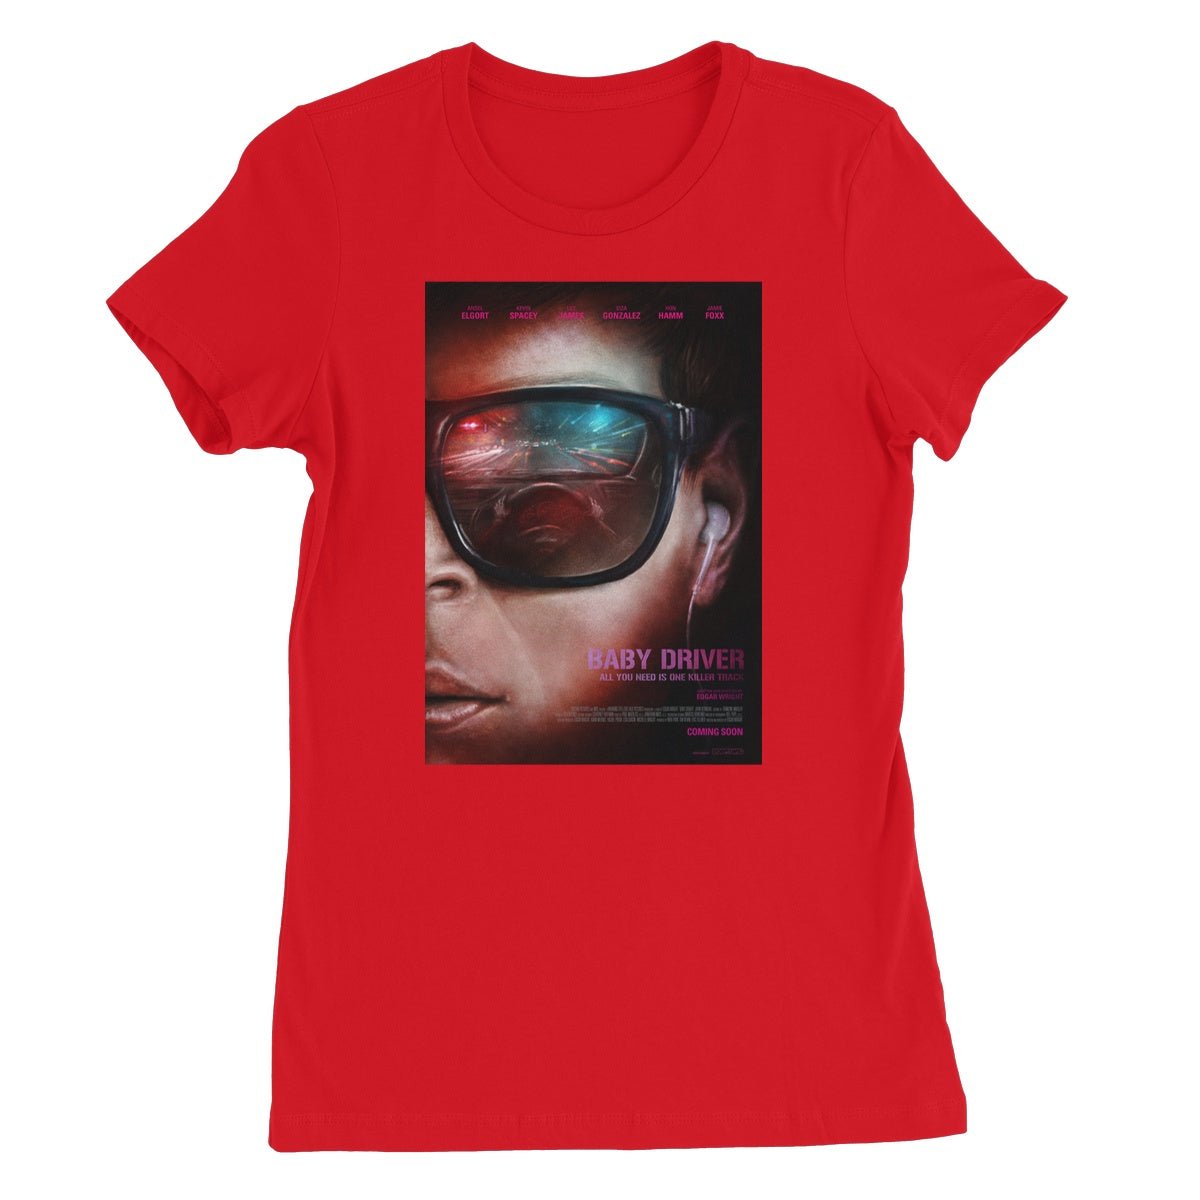 Baby D Illustrated Tee Women's Favourite T-Shirt